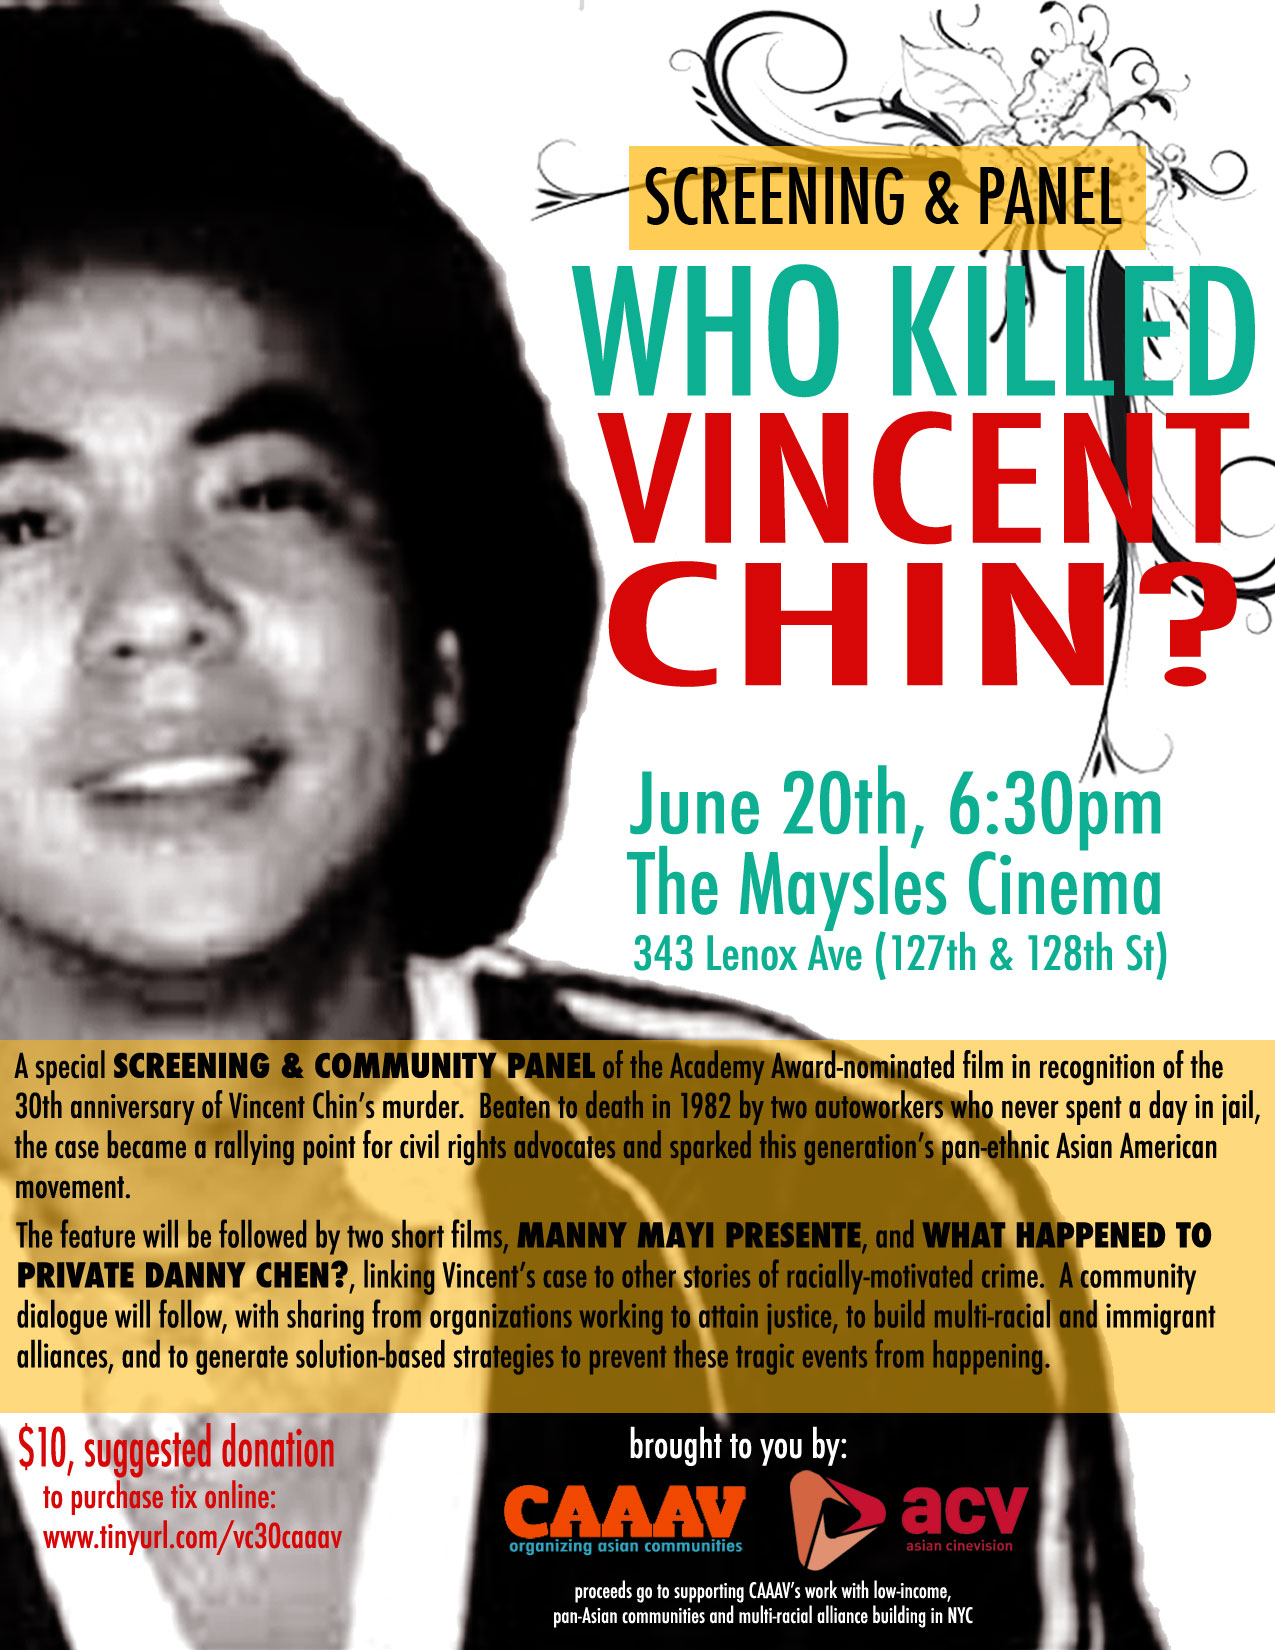 Filed under Uncategorized · Tagged with Asian American, documentary, equality, social justice - CAAAVVincentChin30th